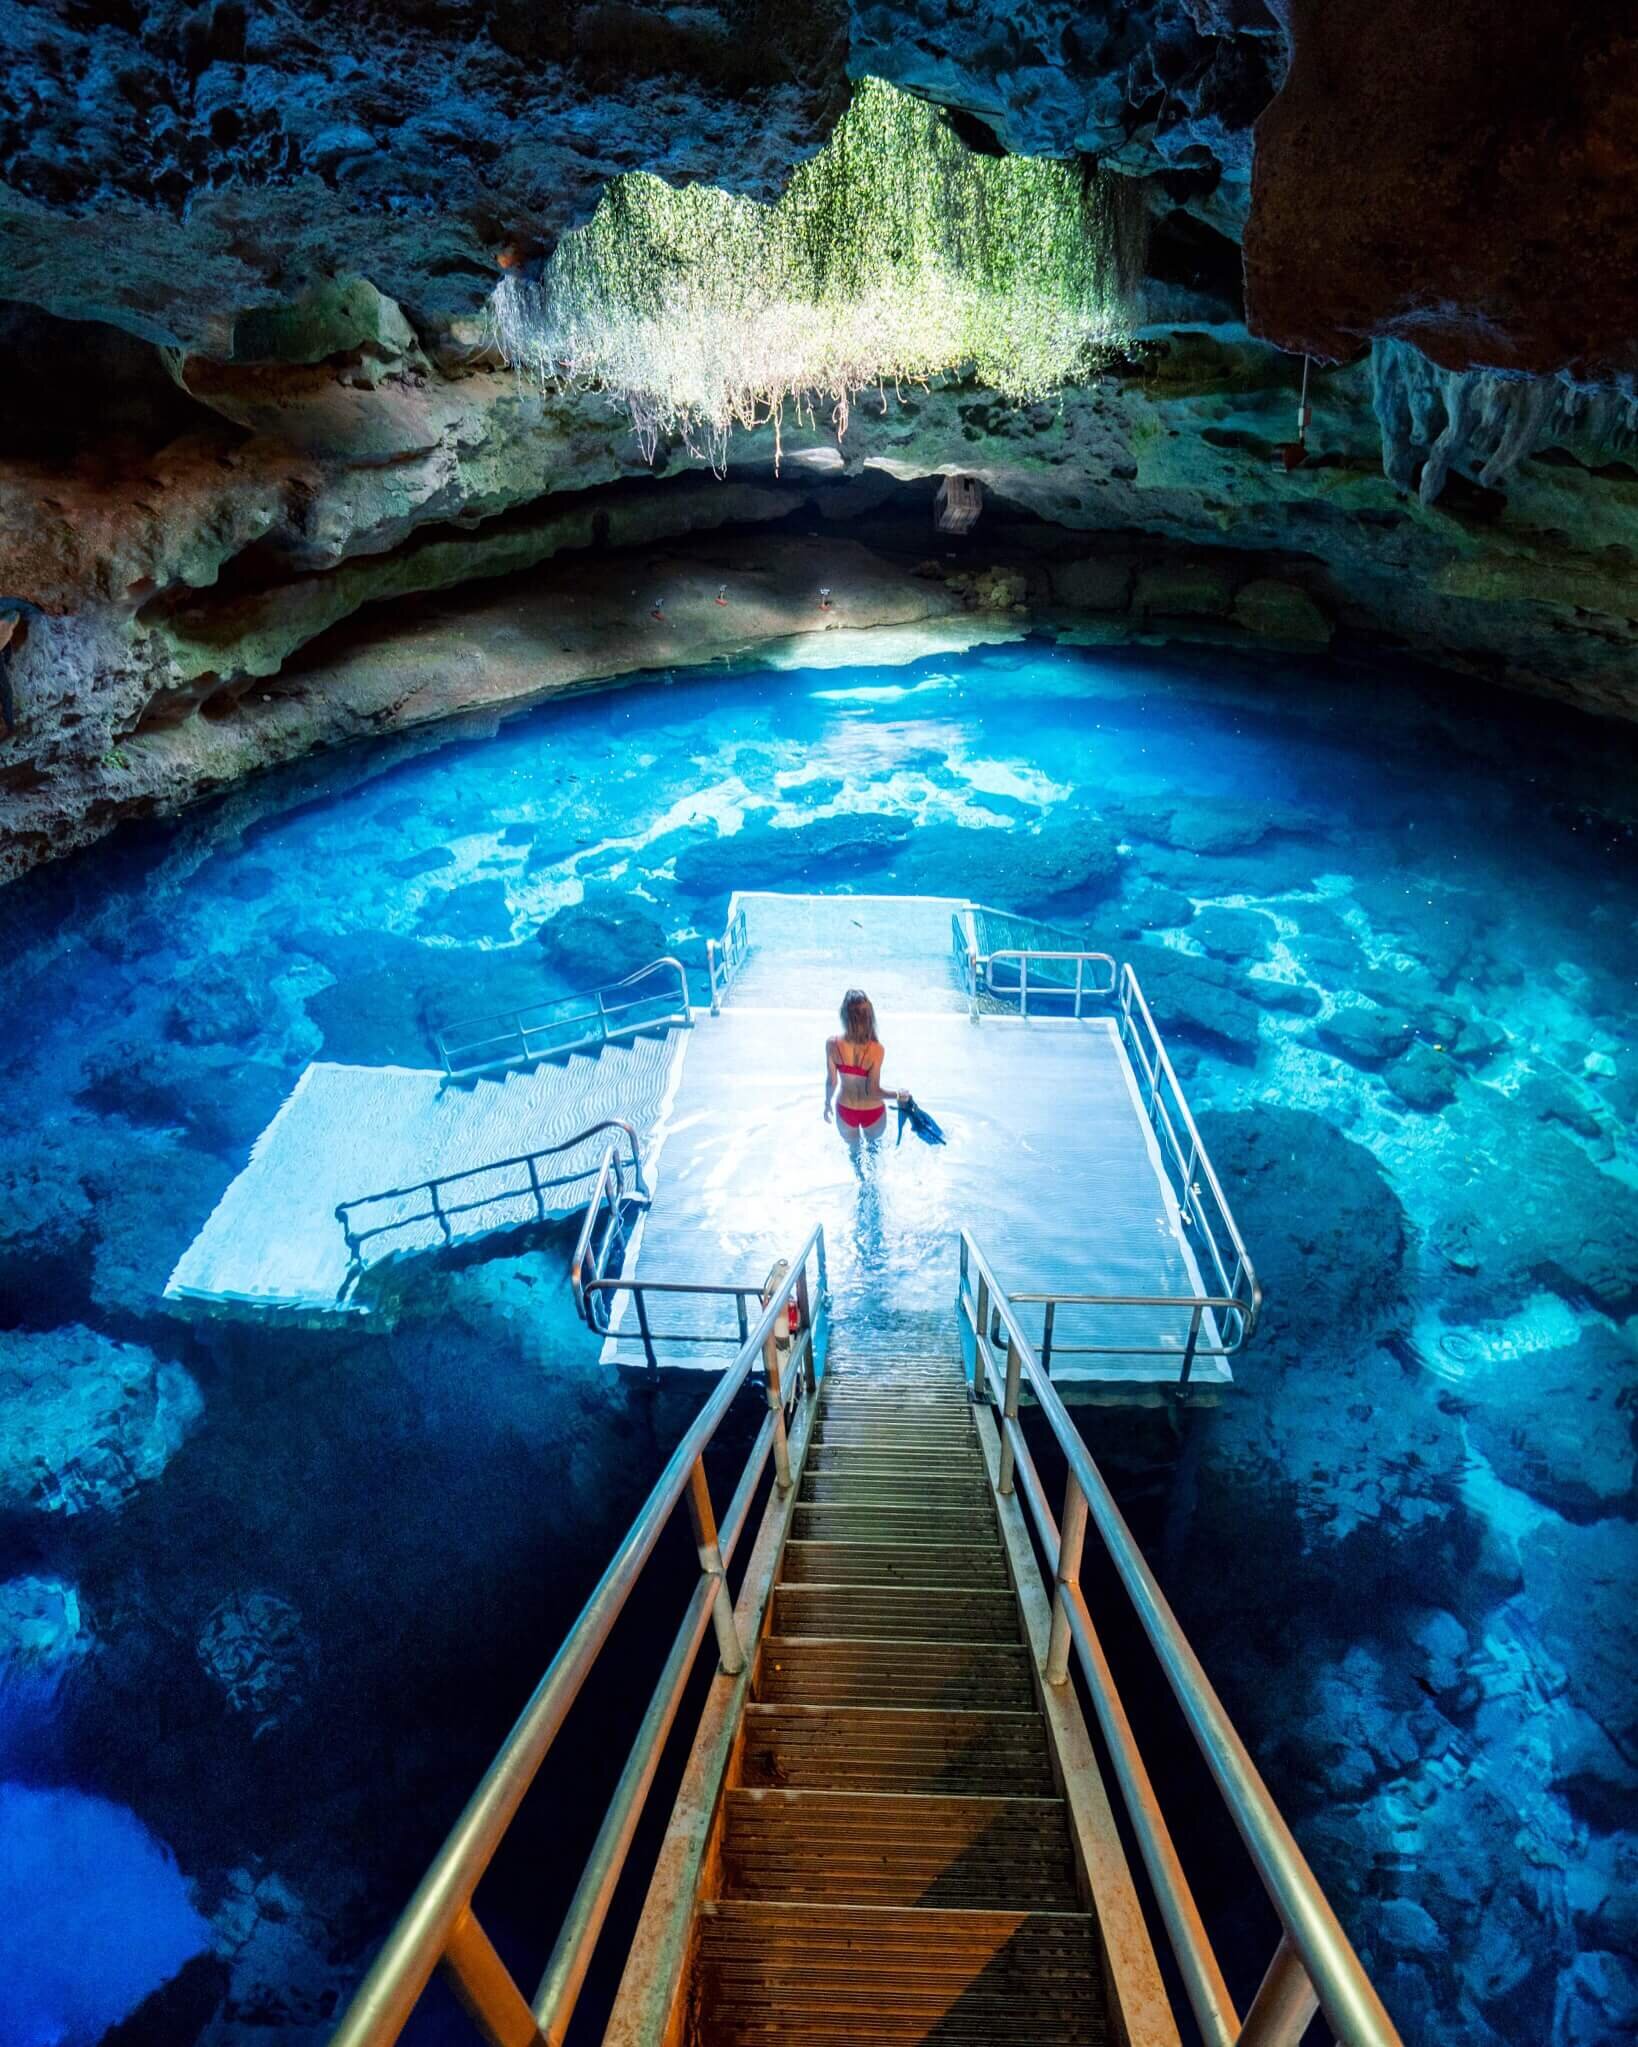 Resembling one of Mexico’s cenotes, Devils Den is now a privately owned scuba training center.